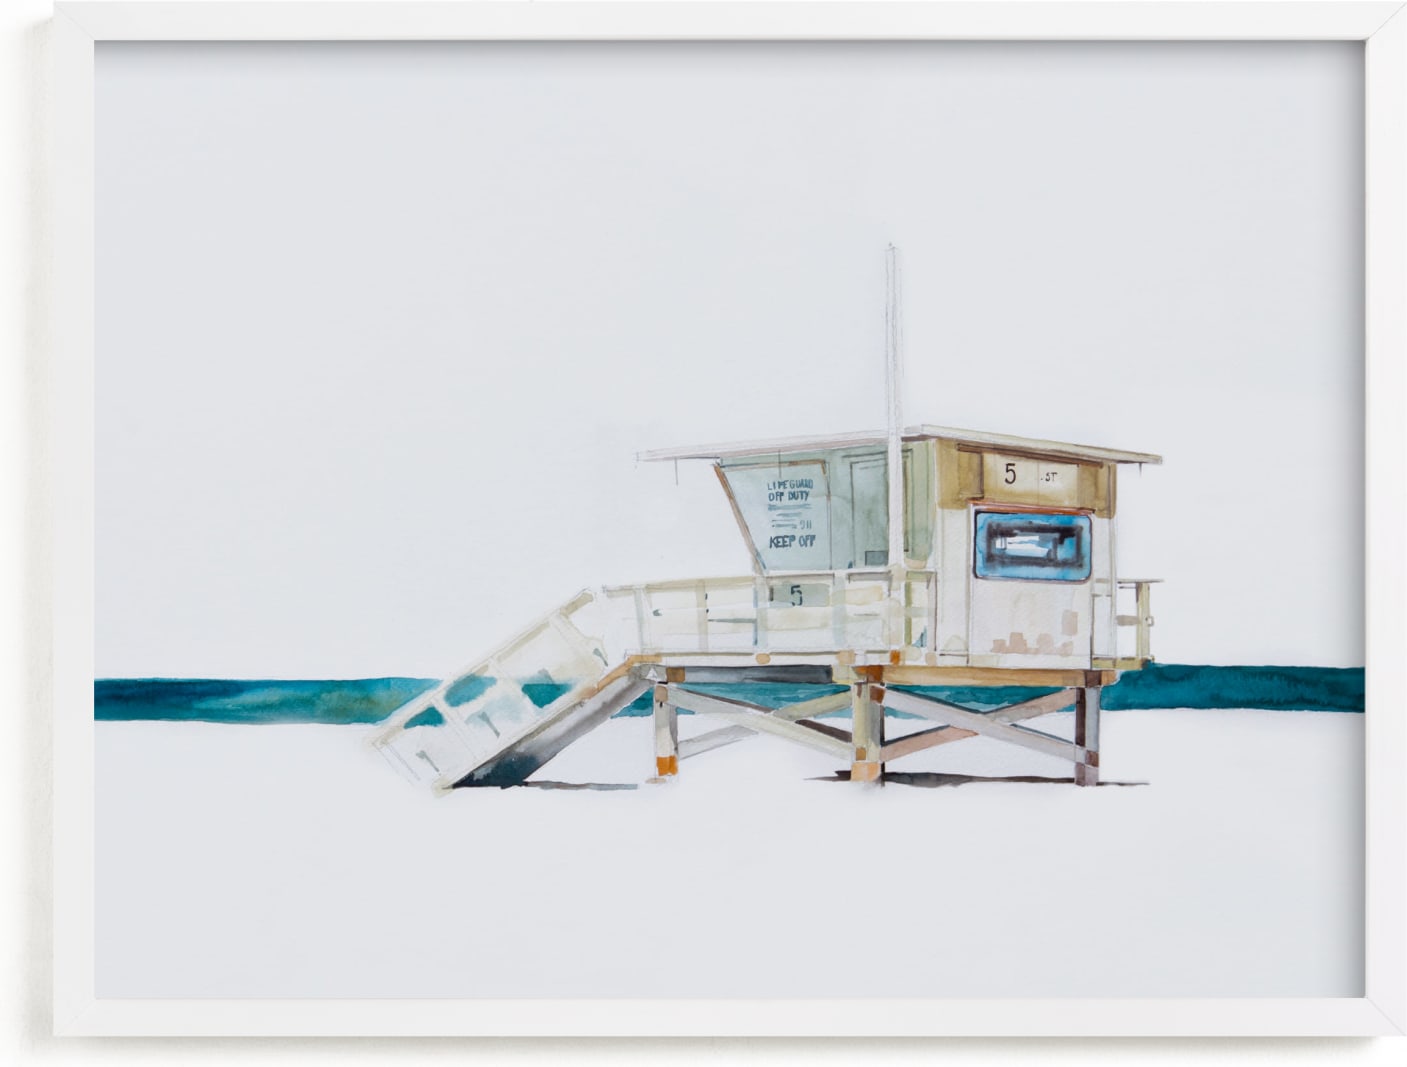 This is a blue art by Viktoria Eperjesi called Hermosa Beach Lifeguard Tower.